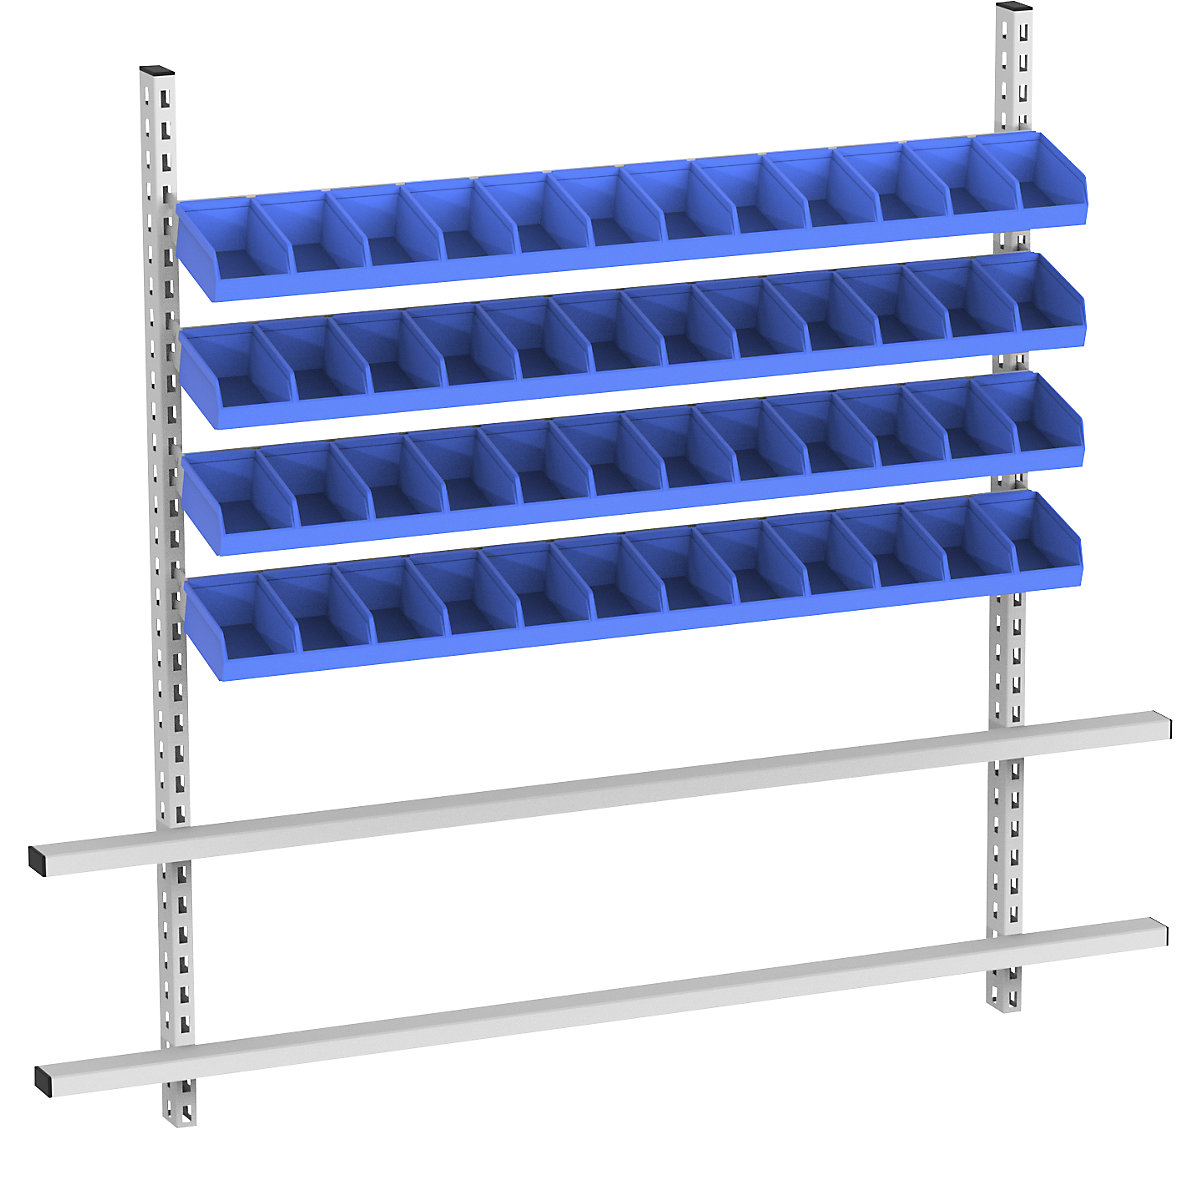 Add-on for table with open fronted storage bins, width 1685 mm, 4 rails with 48 boxes, bins in blue-1